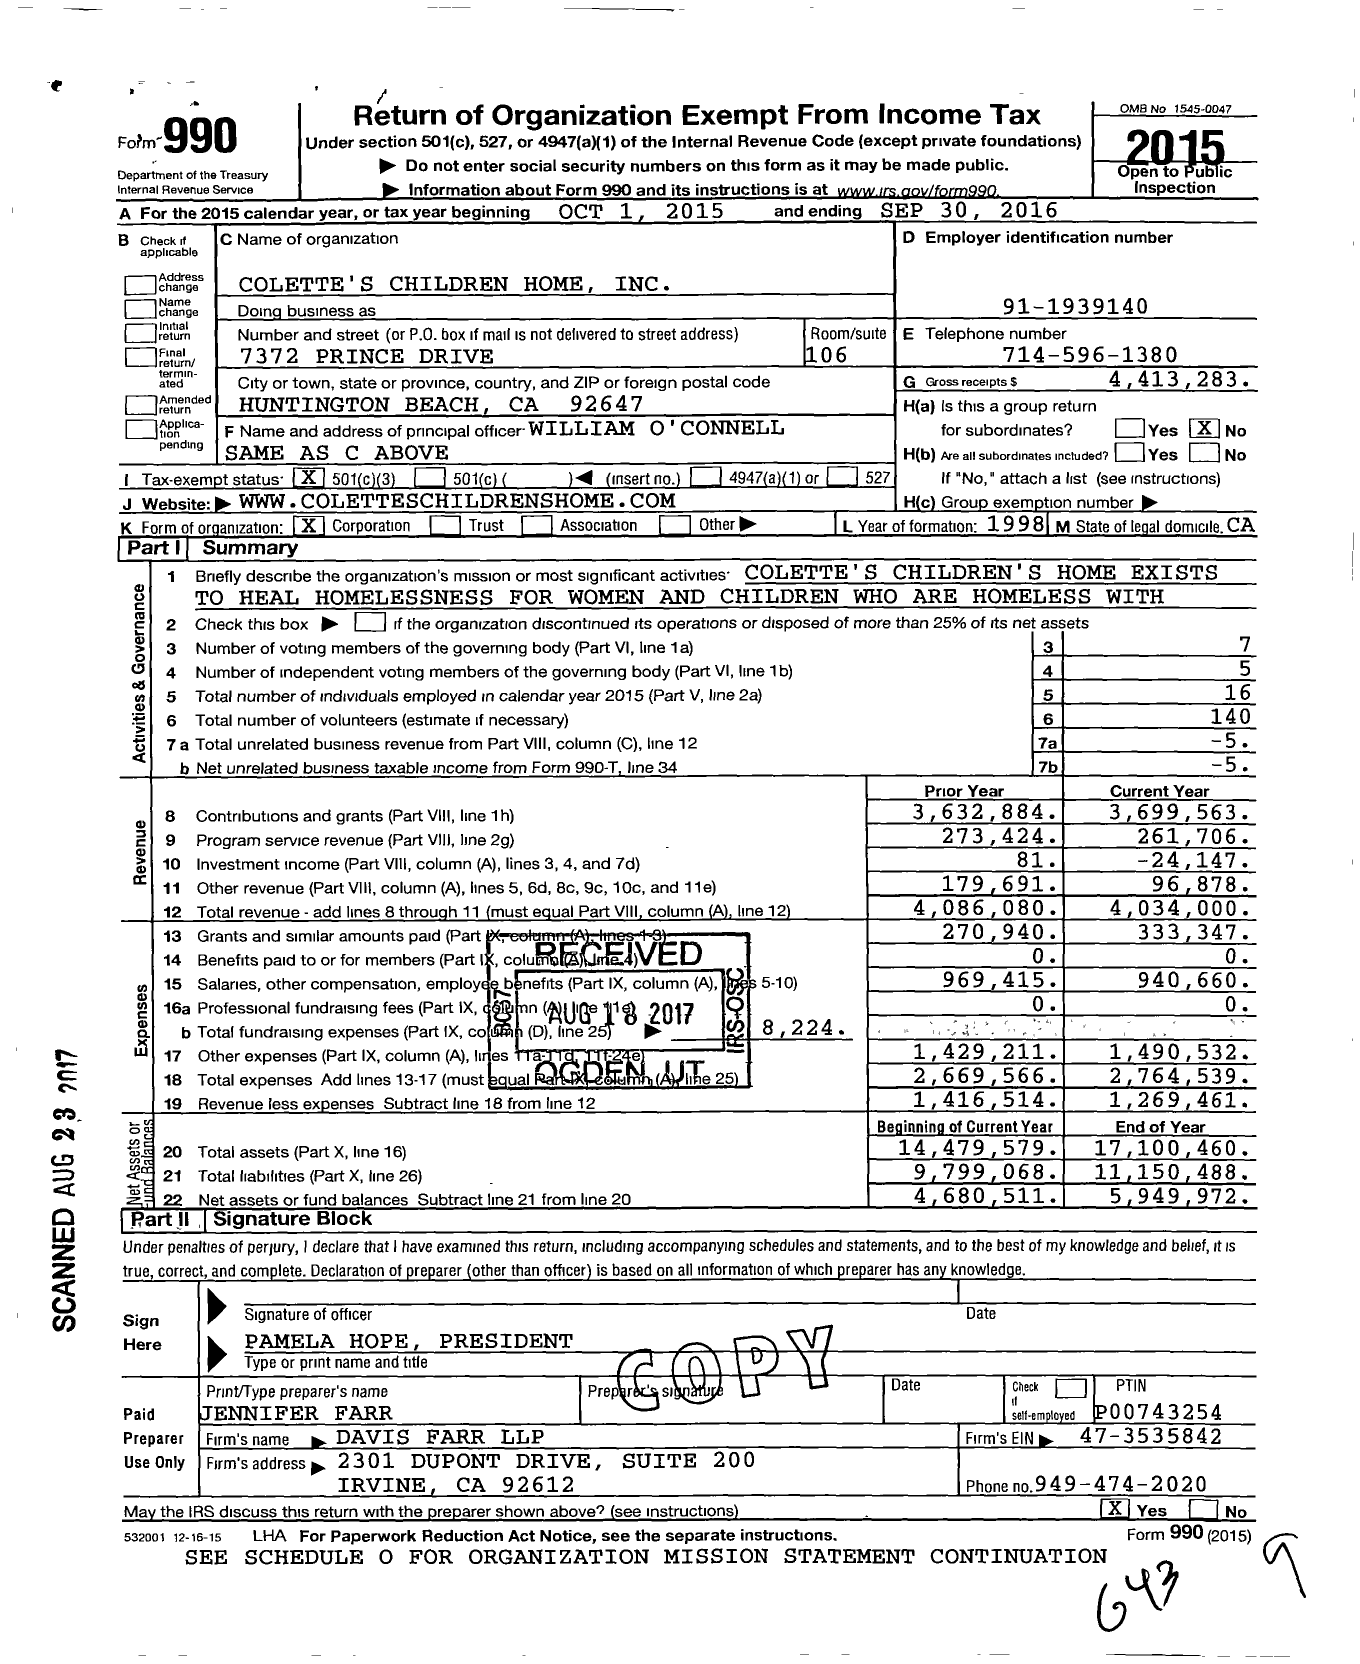 Image of first page of 2015 Form 990 for Colette's Children's Home